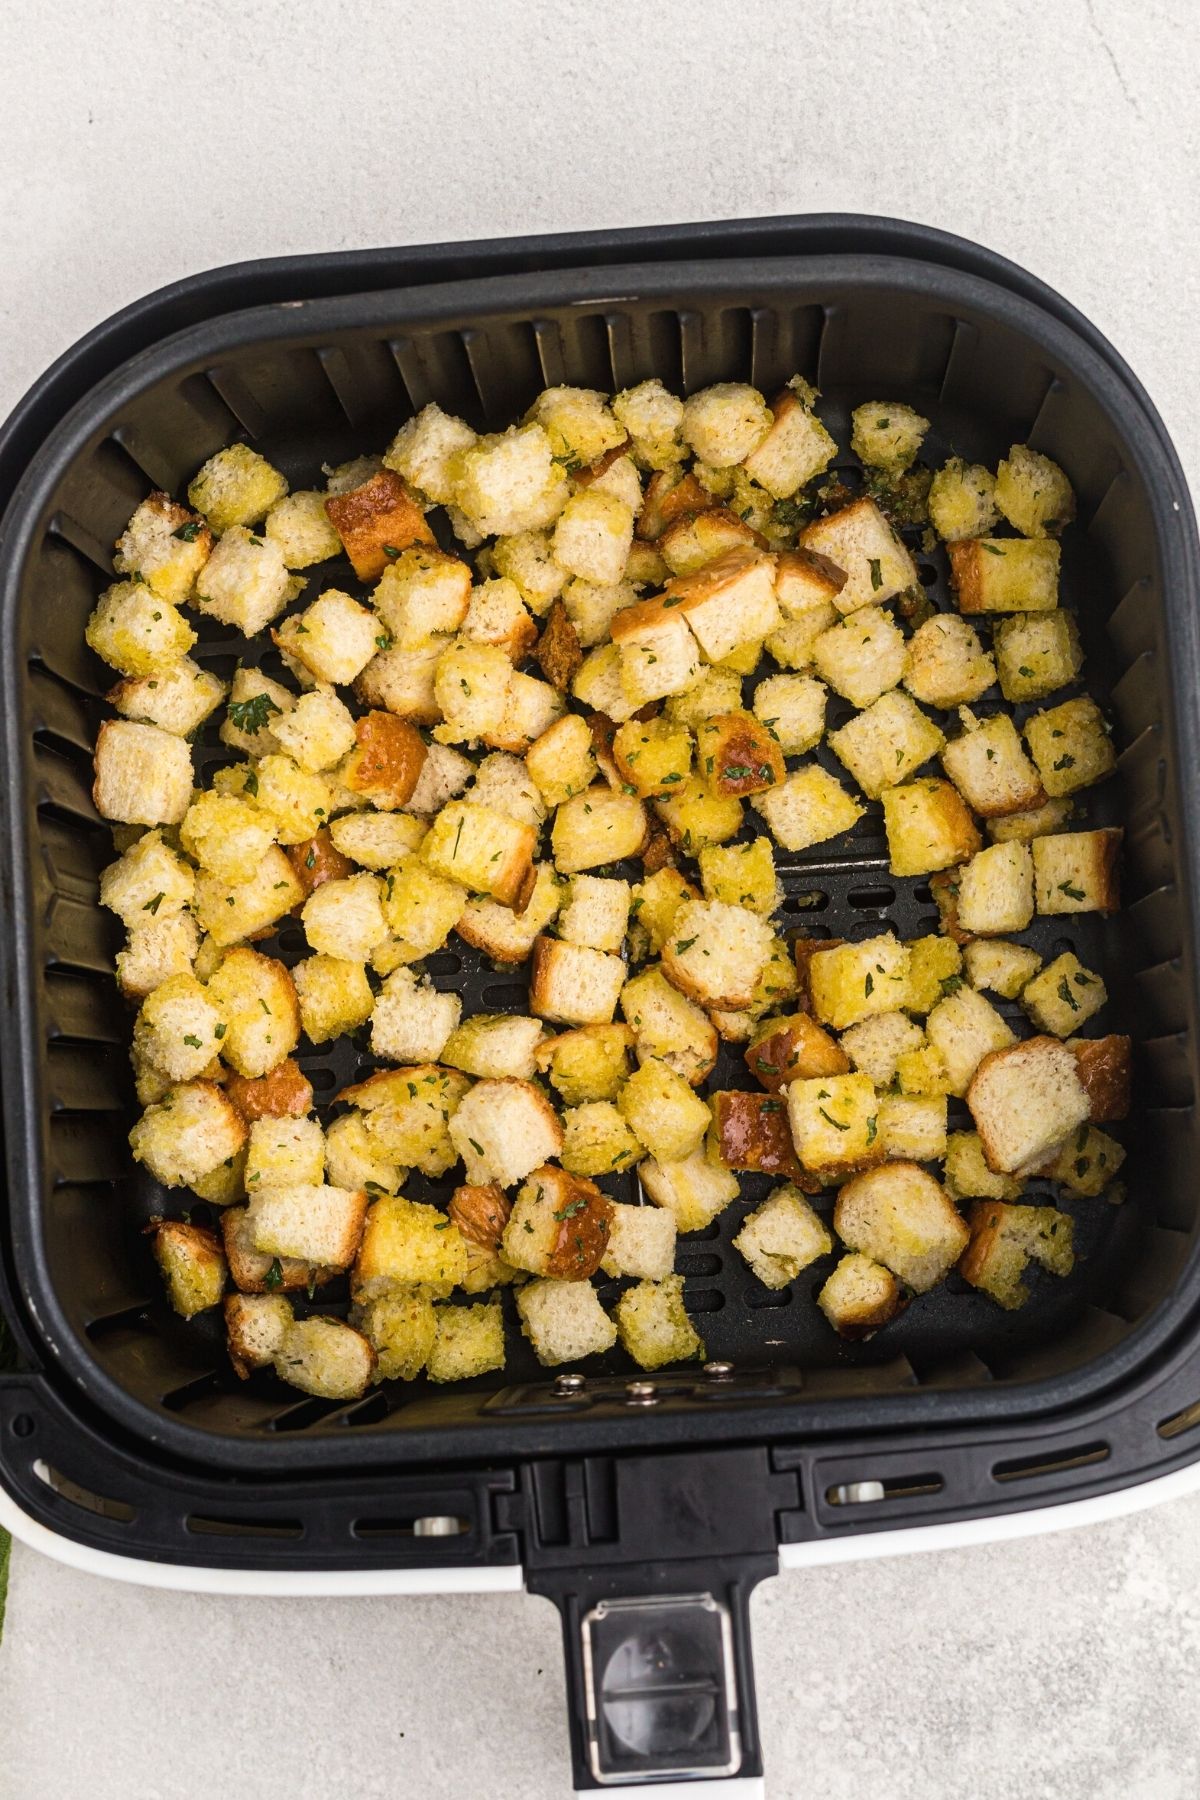 bread cubes coated in olive oil and seasoned in an air fryer basket